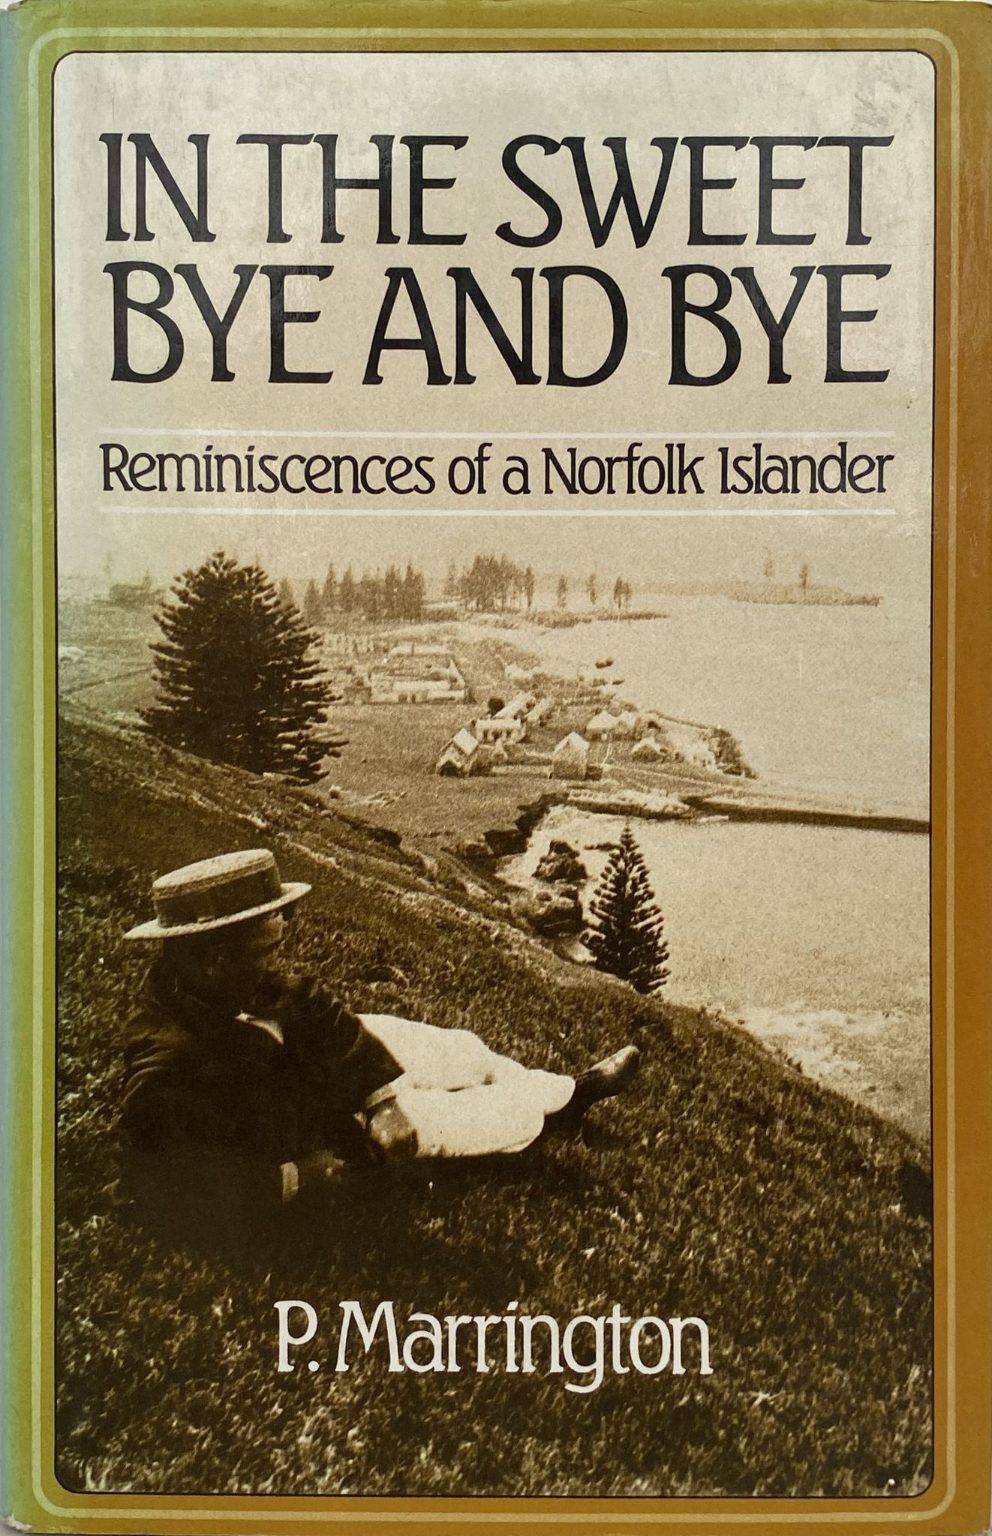 IN THE SWEET BYE AND BYE: Reminiscences of a Norfolk Islander